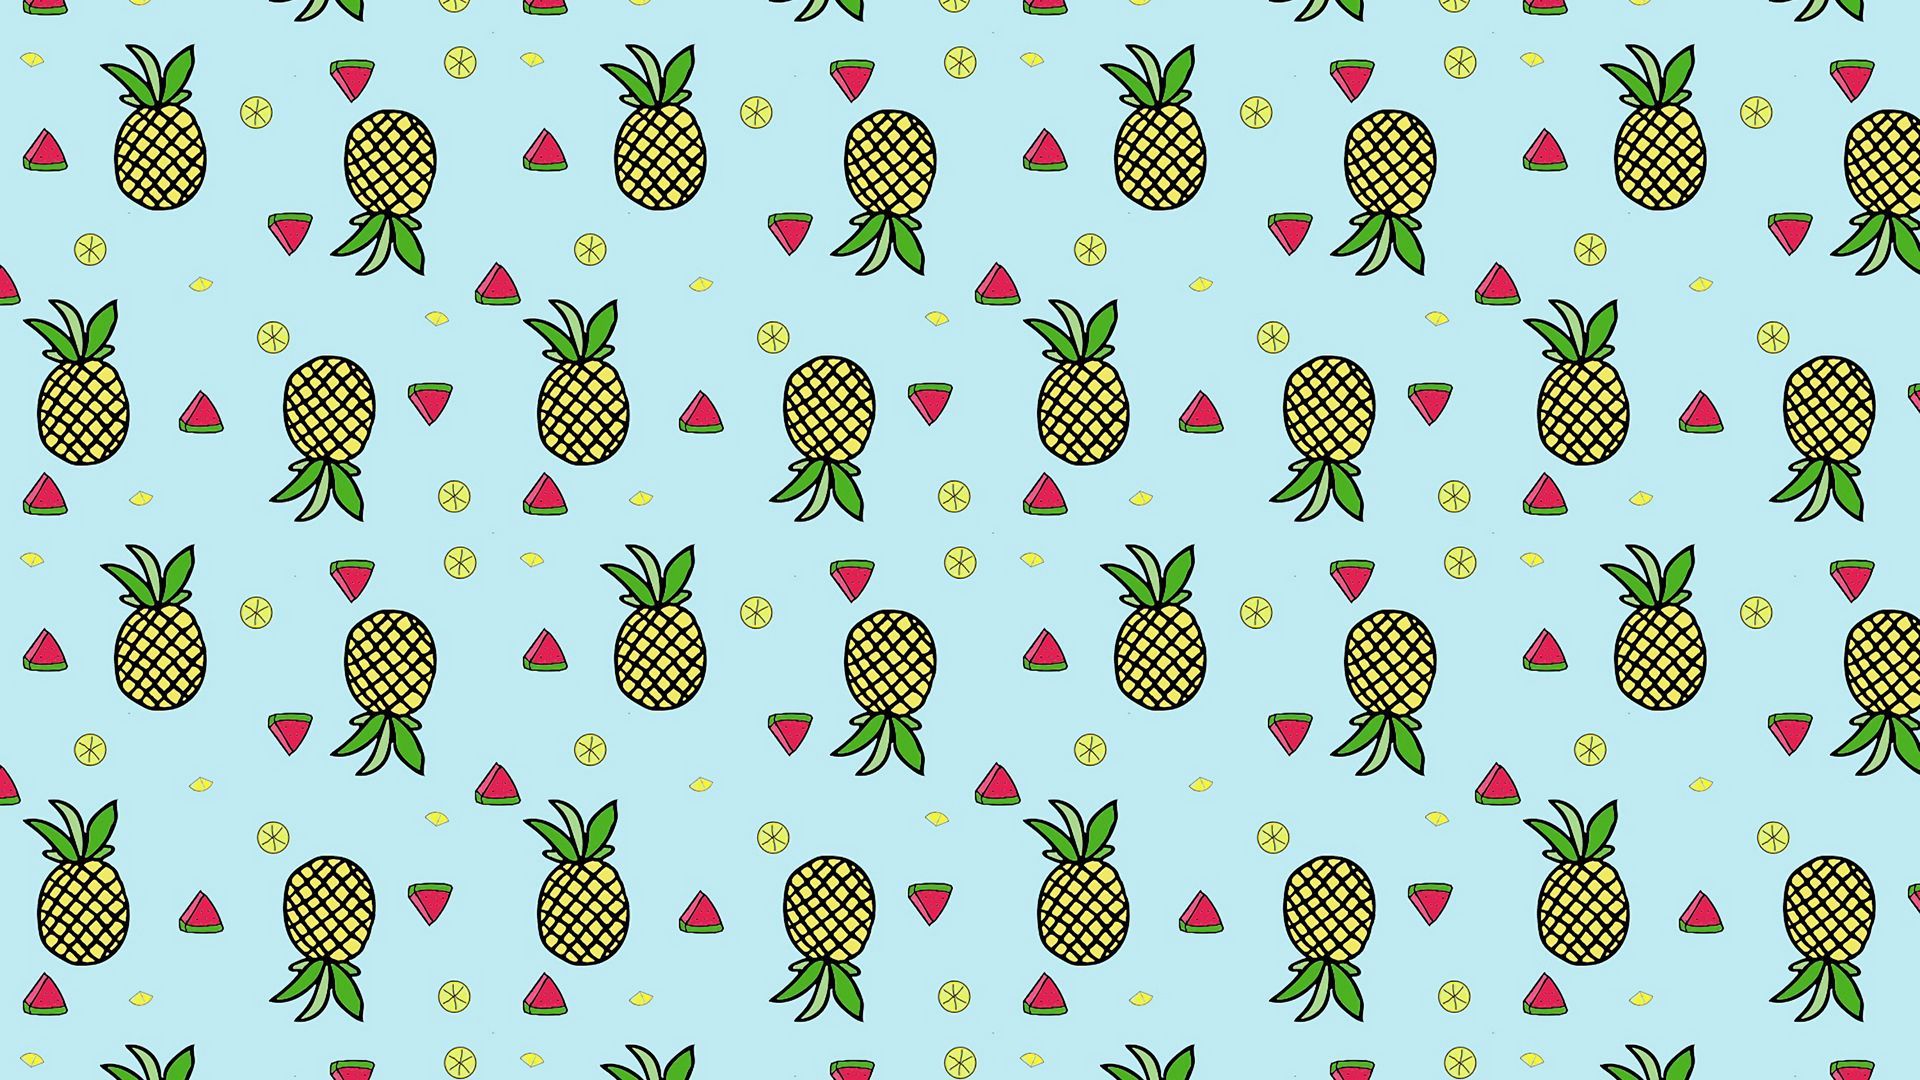 1920x1080 The Awesome Pineapple Fruit Wallpaper For Desktop.